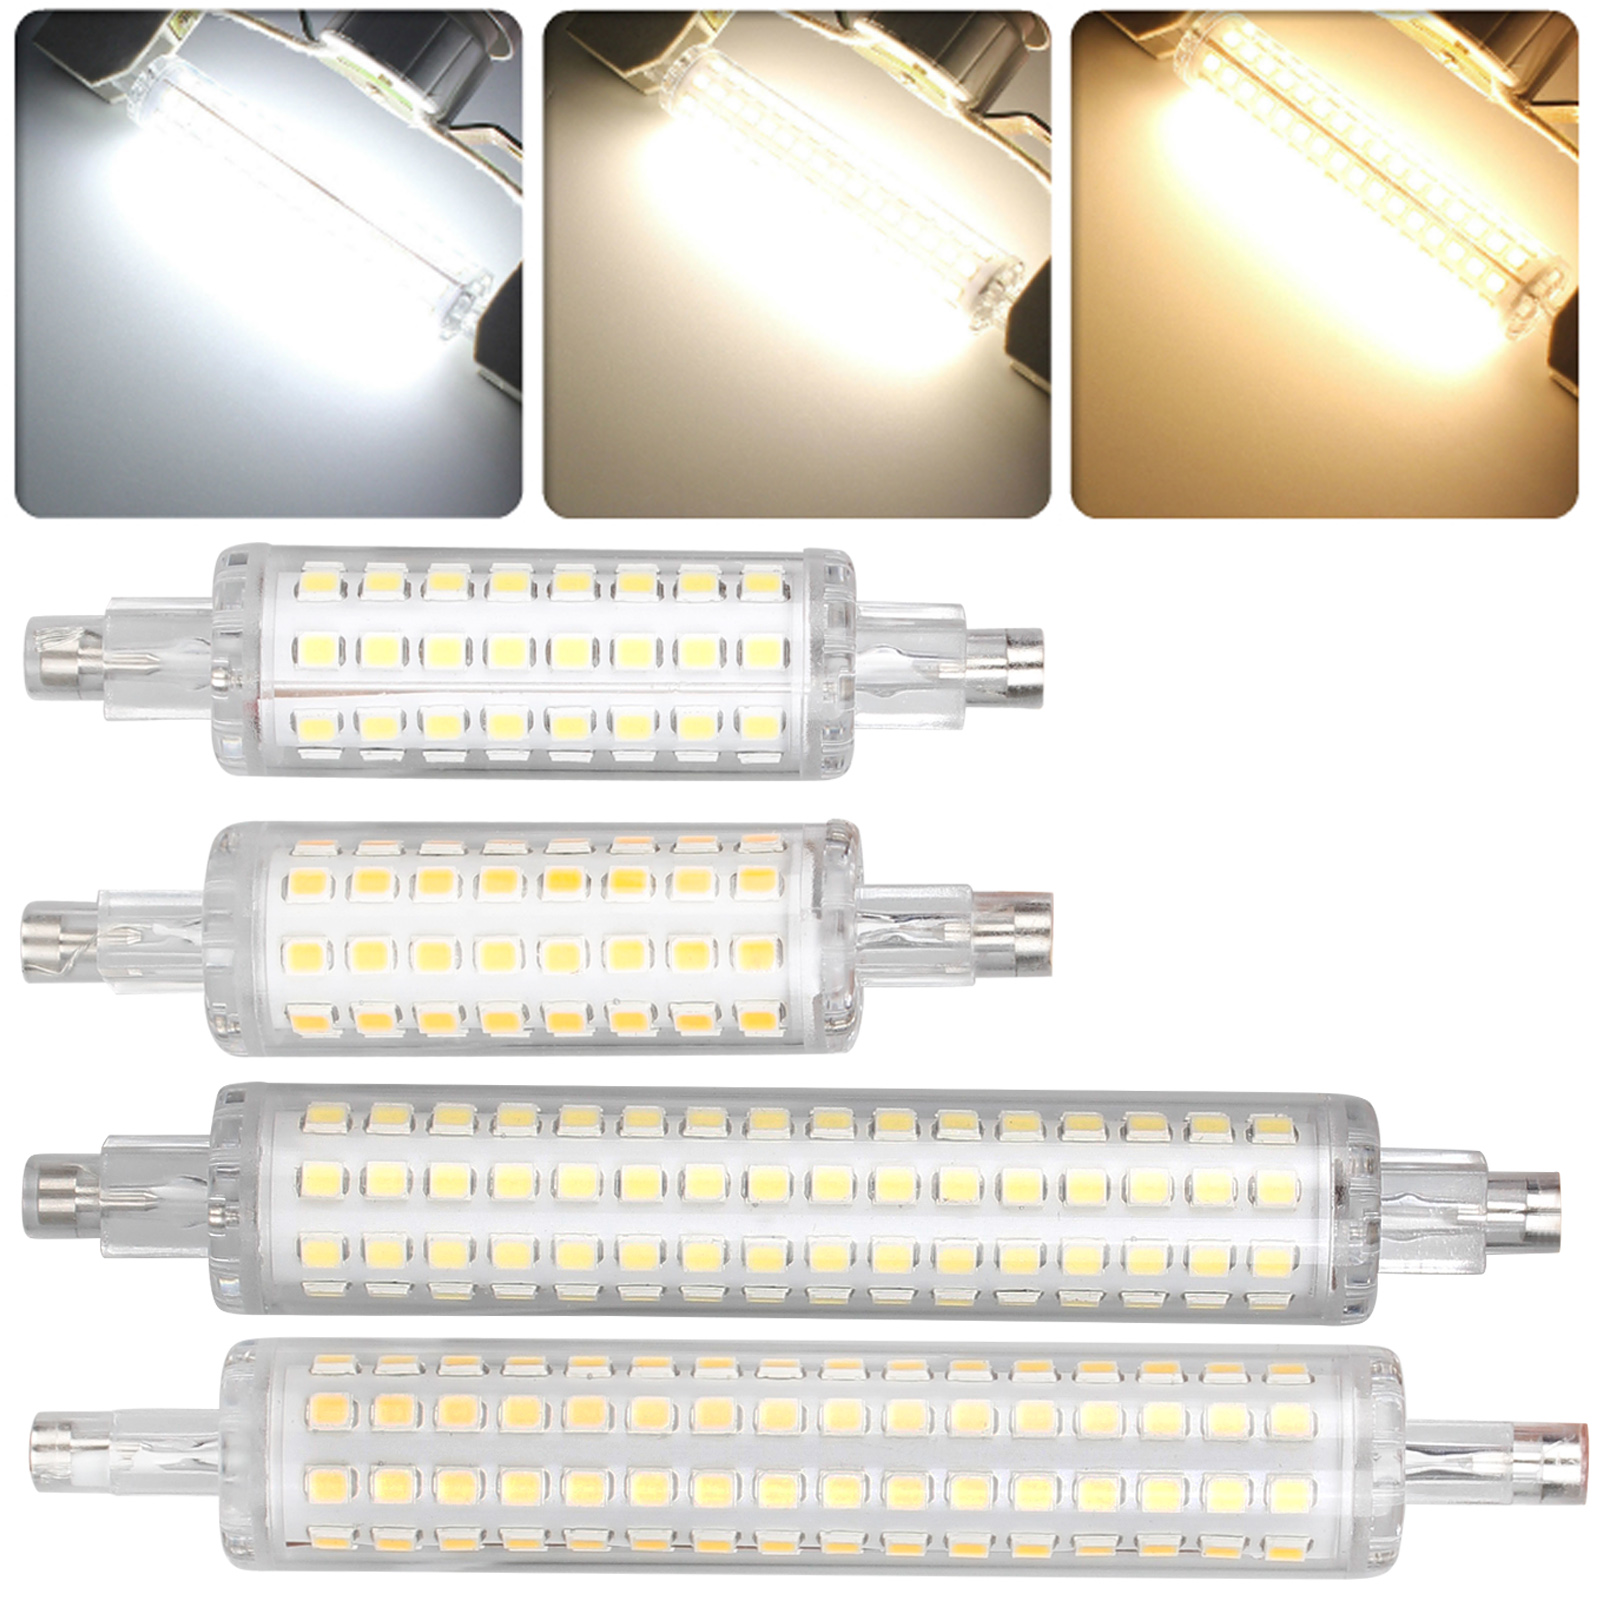 Cataract naast rundvlees Price history & Review on R7S LED 78mm 118mm Flood Light Bulb 2835 SMD  Replace 60W 120W Halogen 110V 220V Lamp | AliExpress Seller - Yoryzeng Lamp  Store | Alitools.io